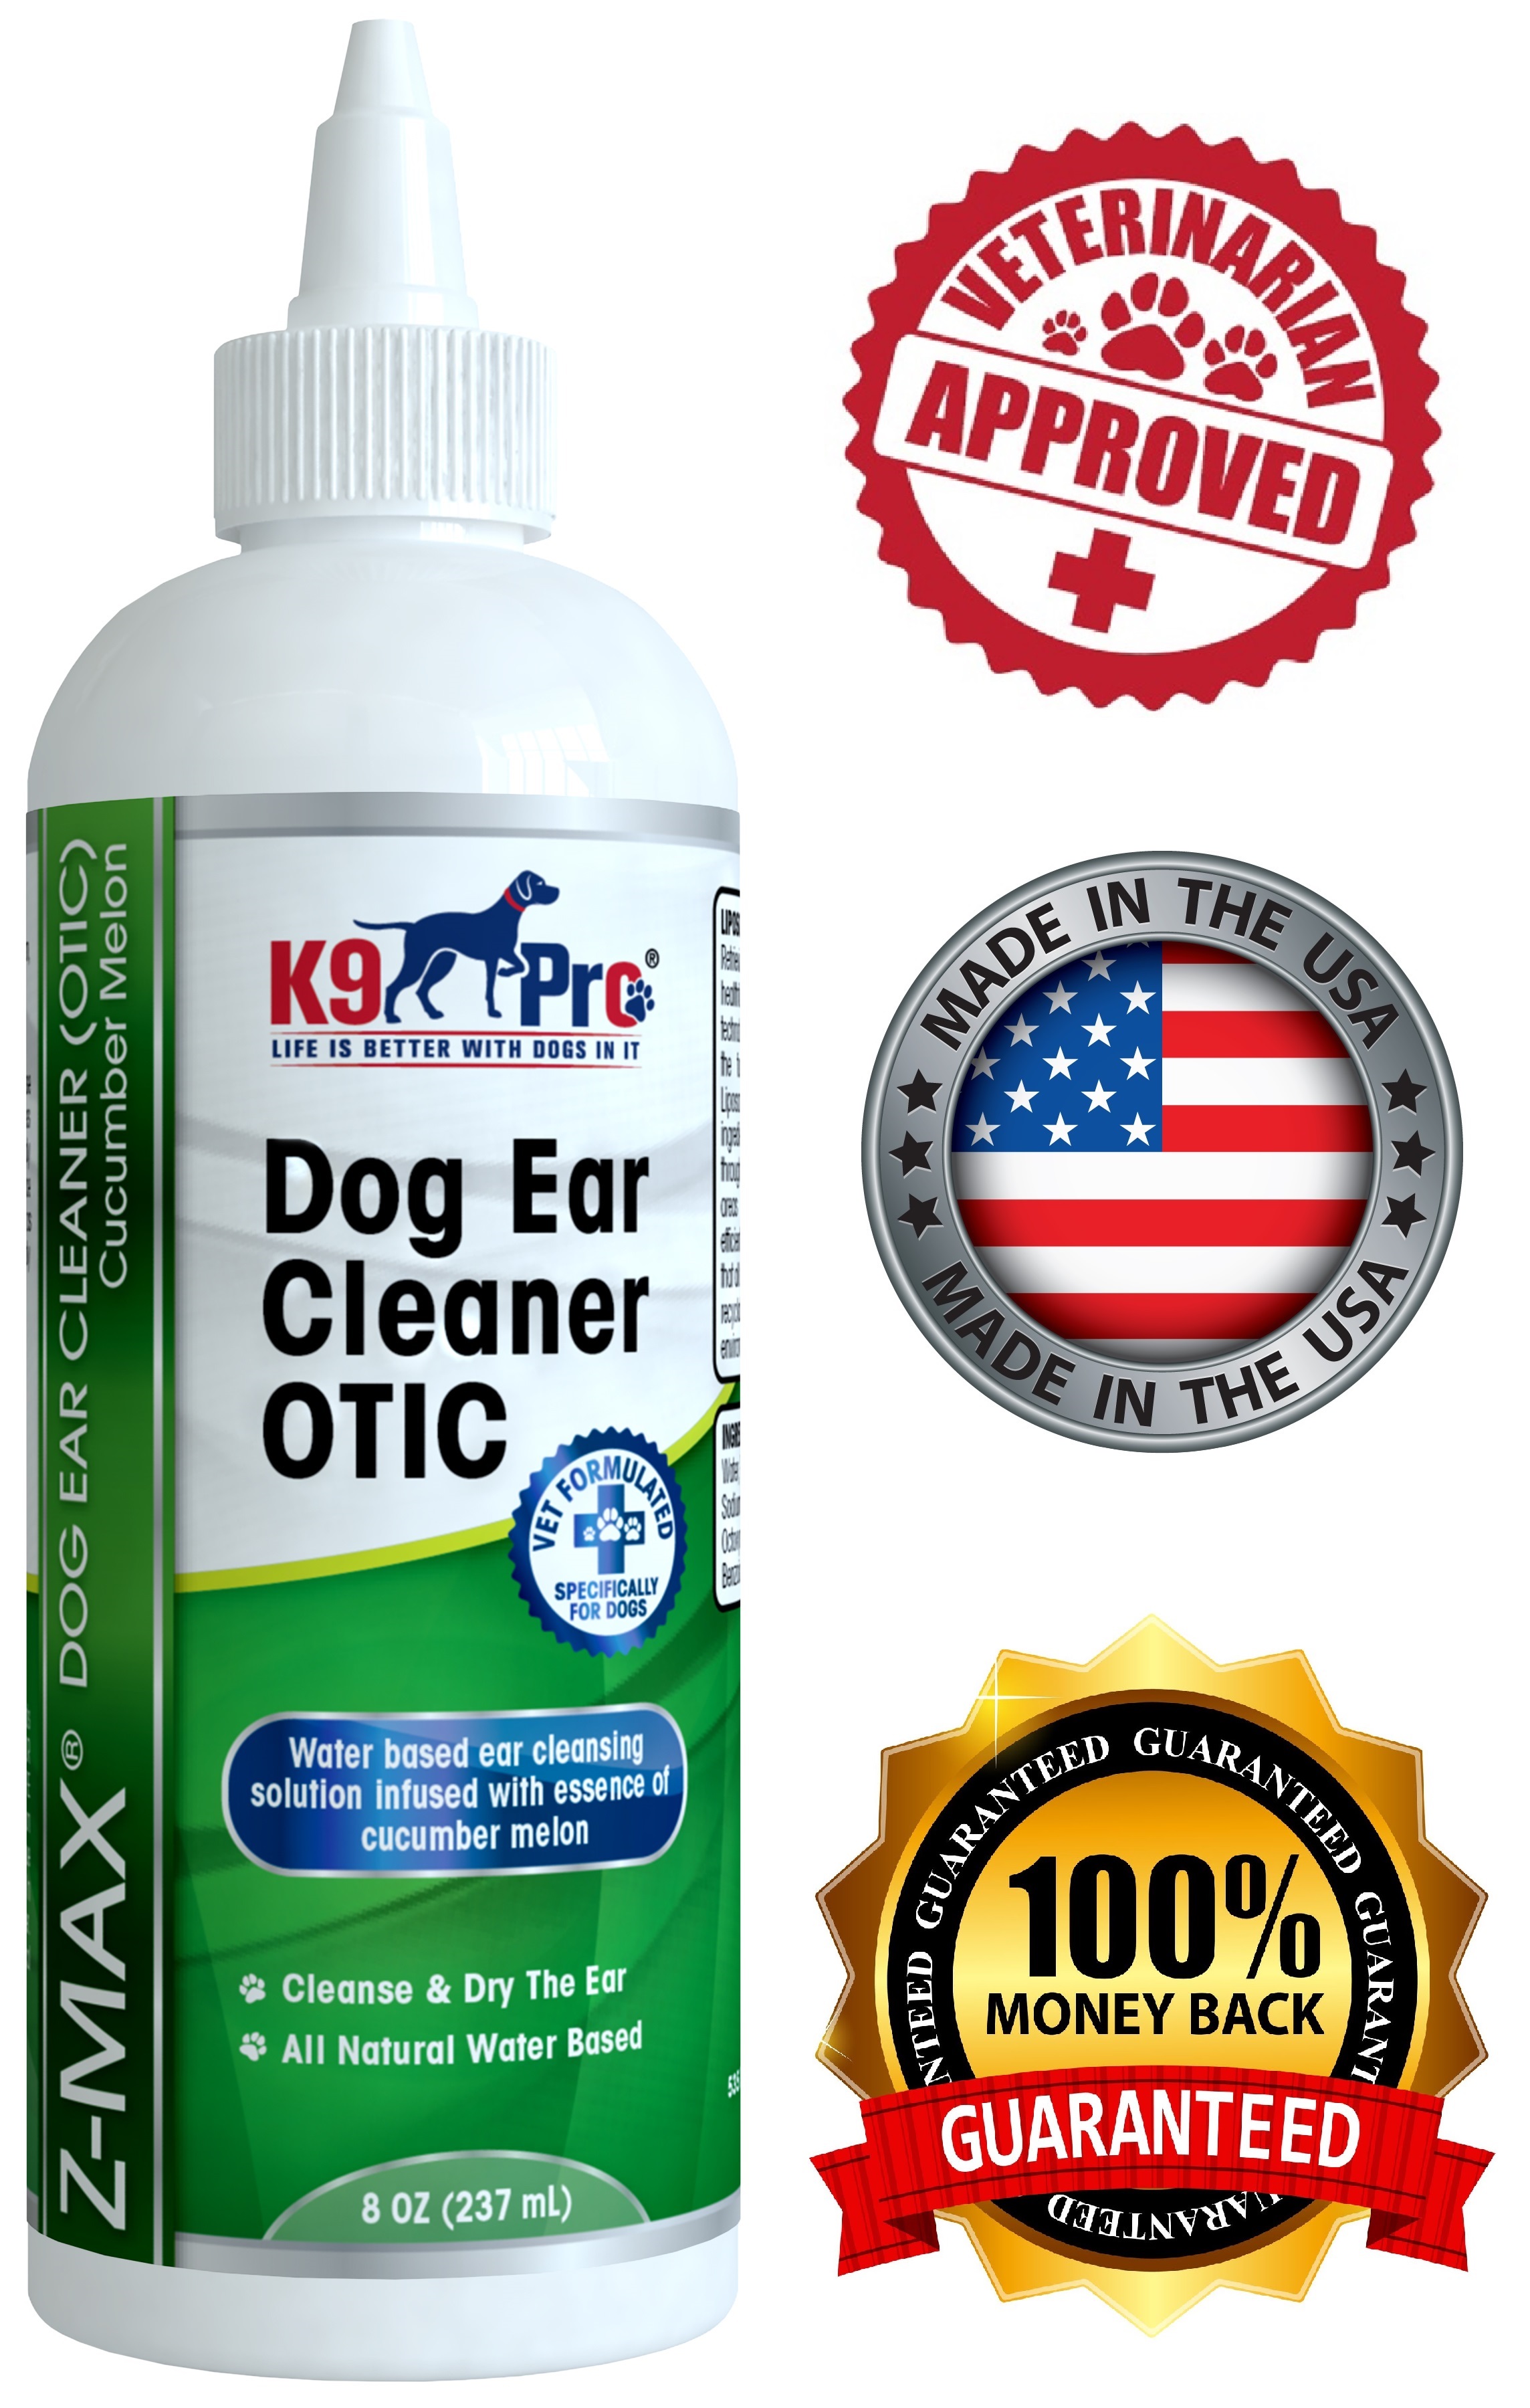 Dog Ear Cleaner Launched For Summer Care by Health Focused Brand ...